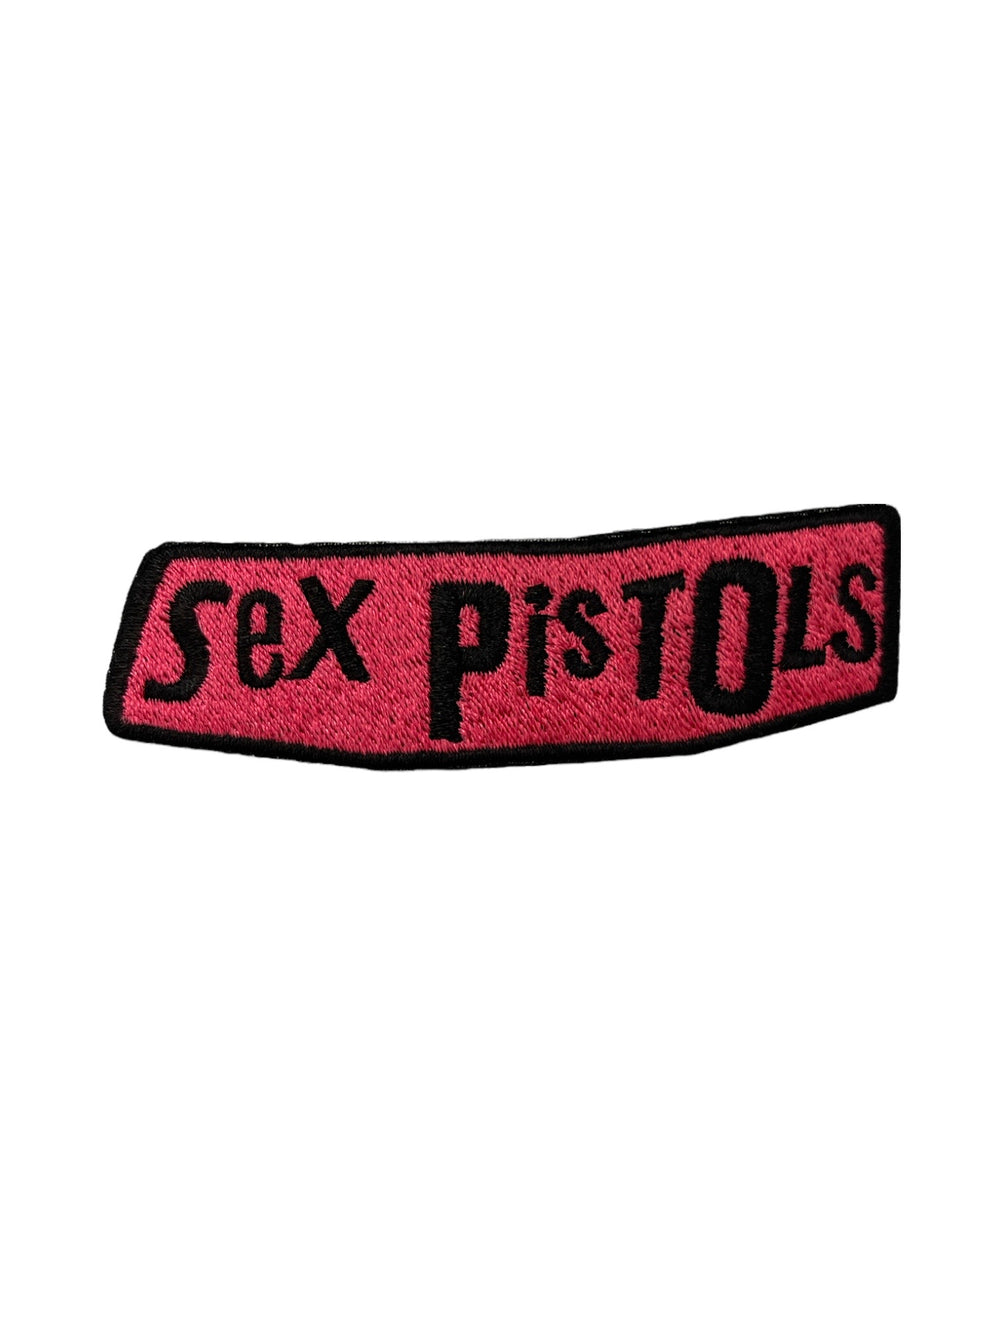 Sex Pistols Logo Official Woven Patch Brand New Official